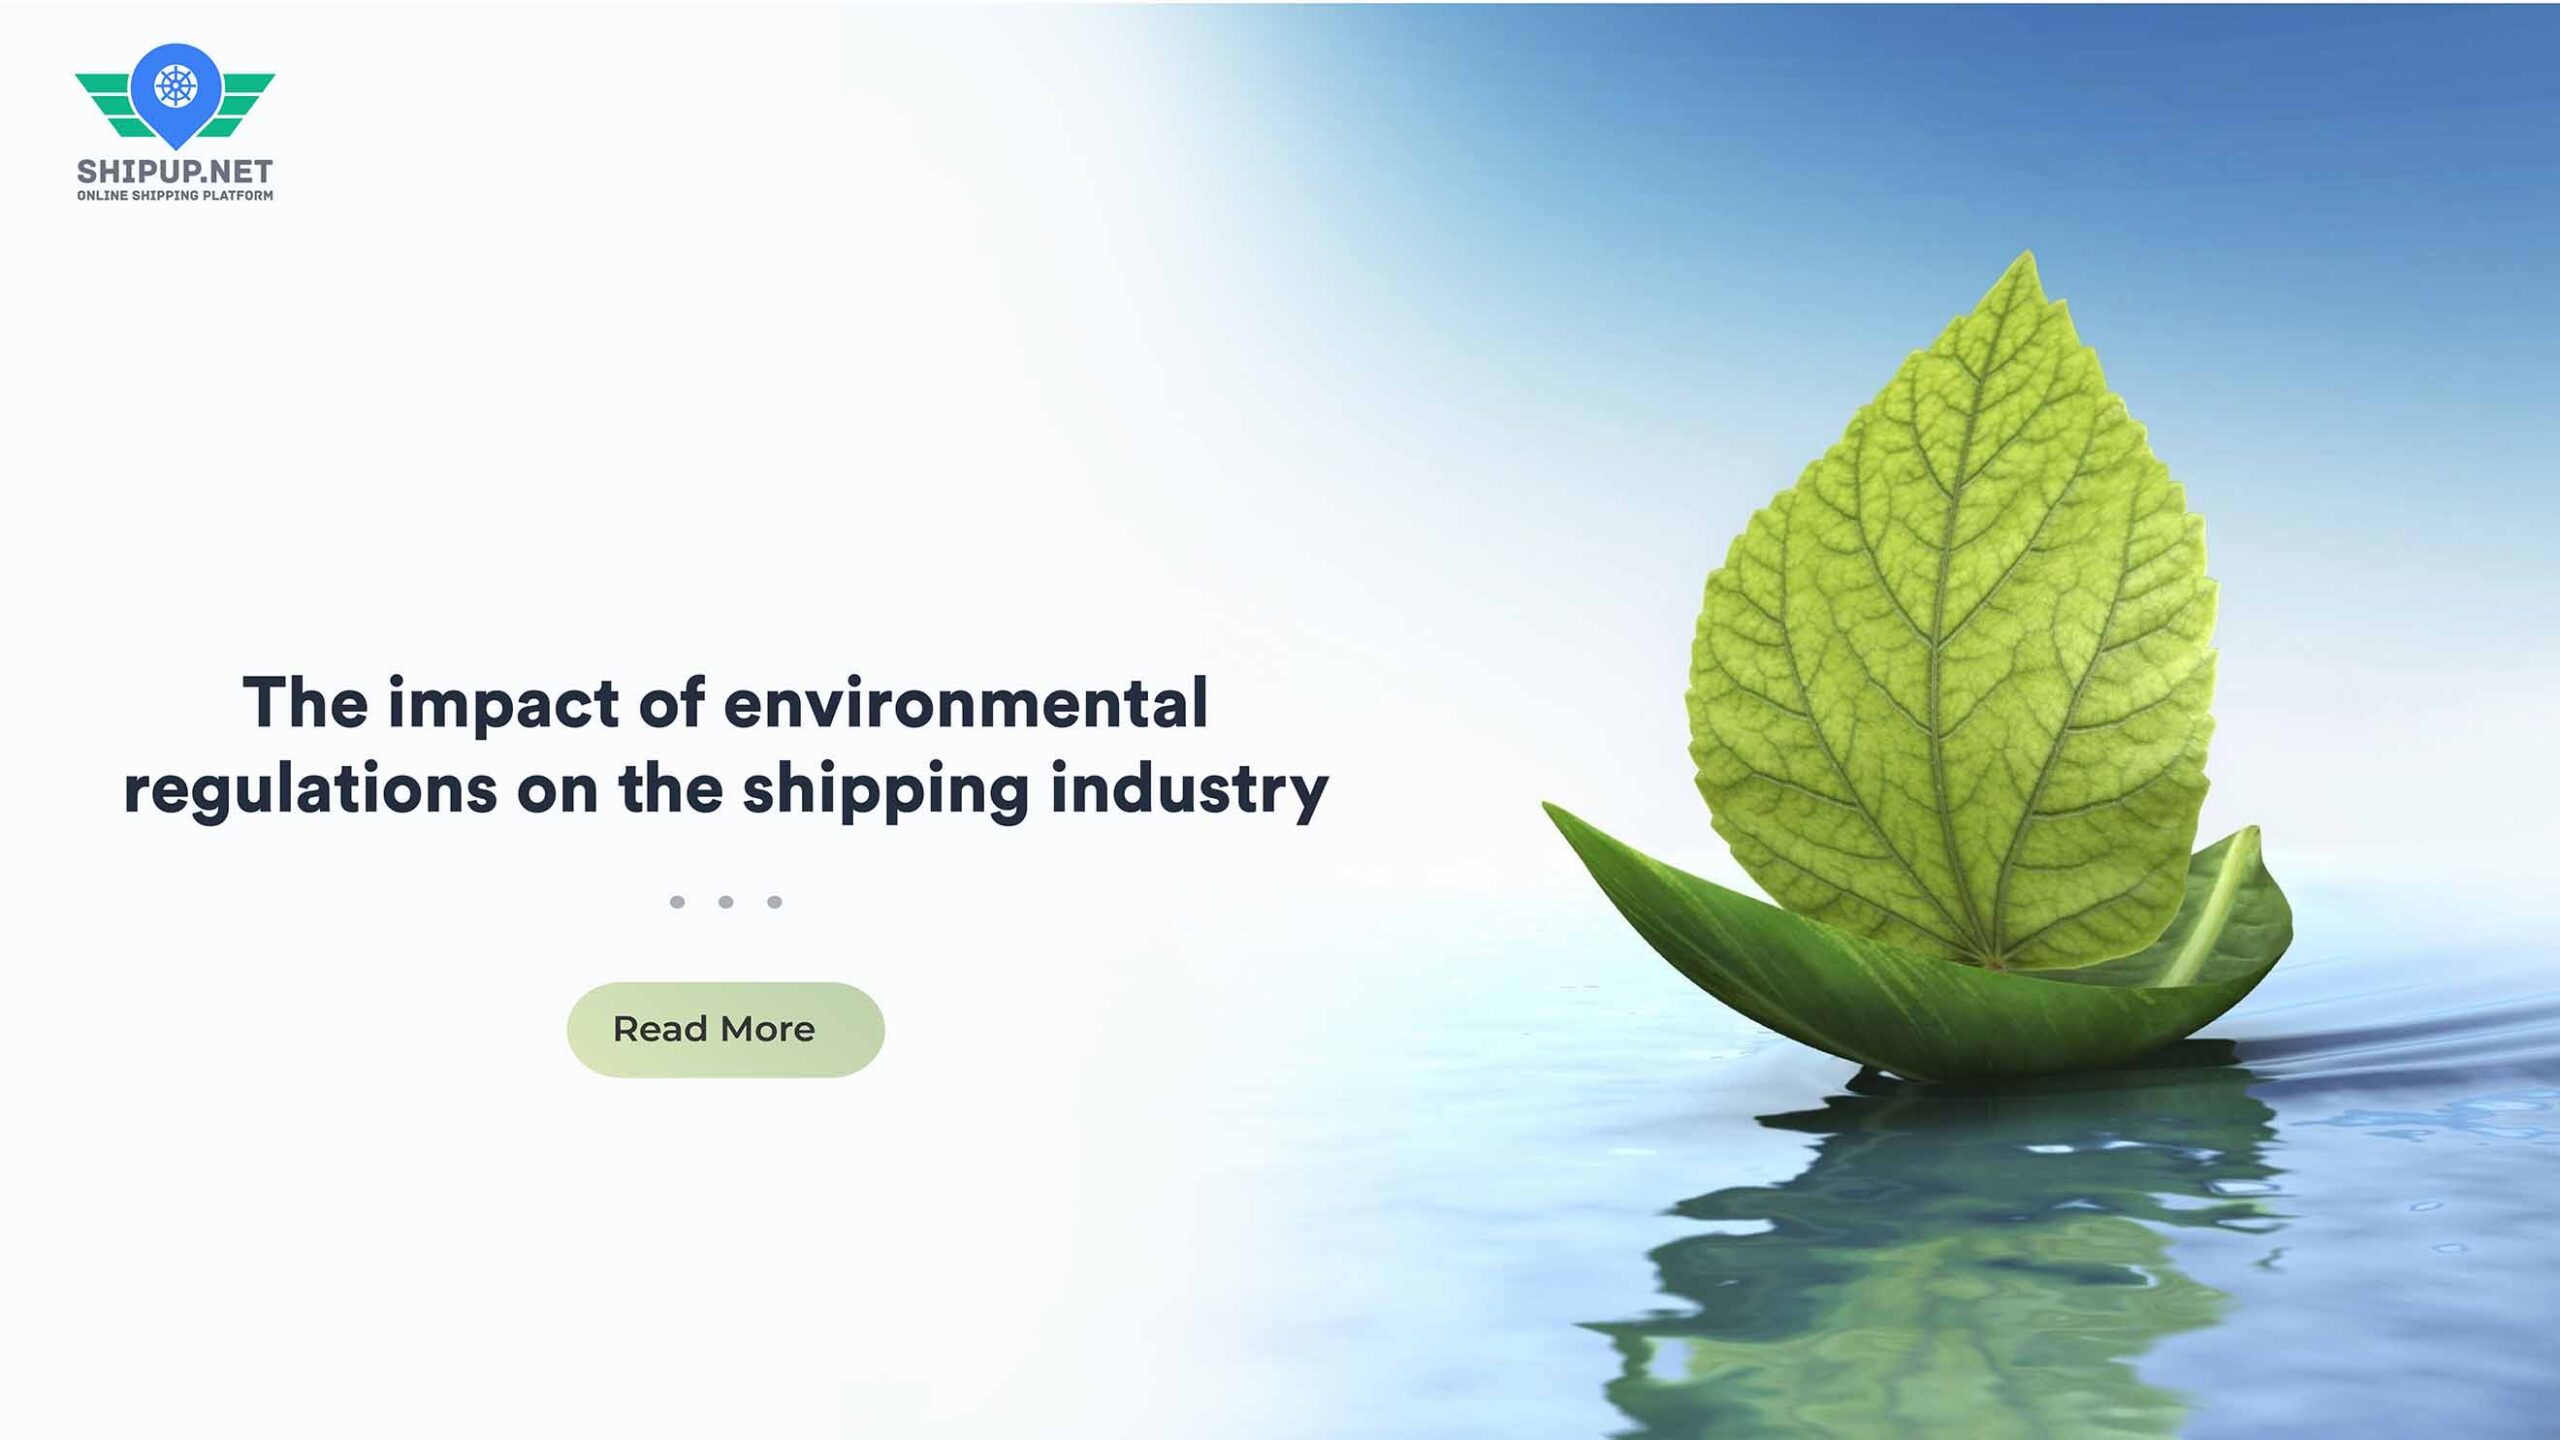 The impact of environmental regulations on the shipping industry